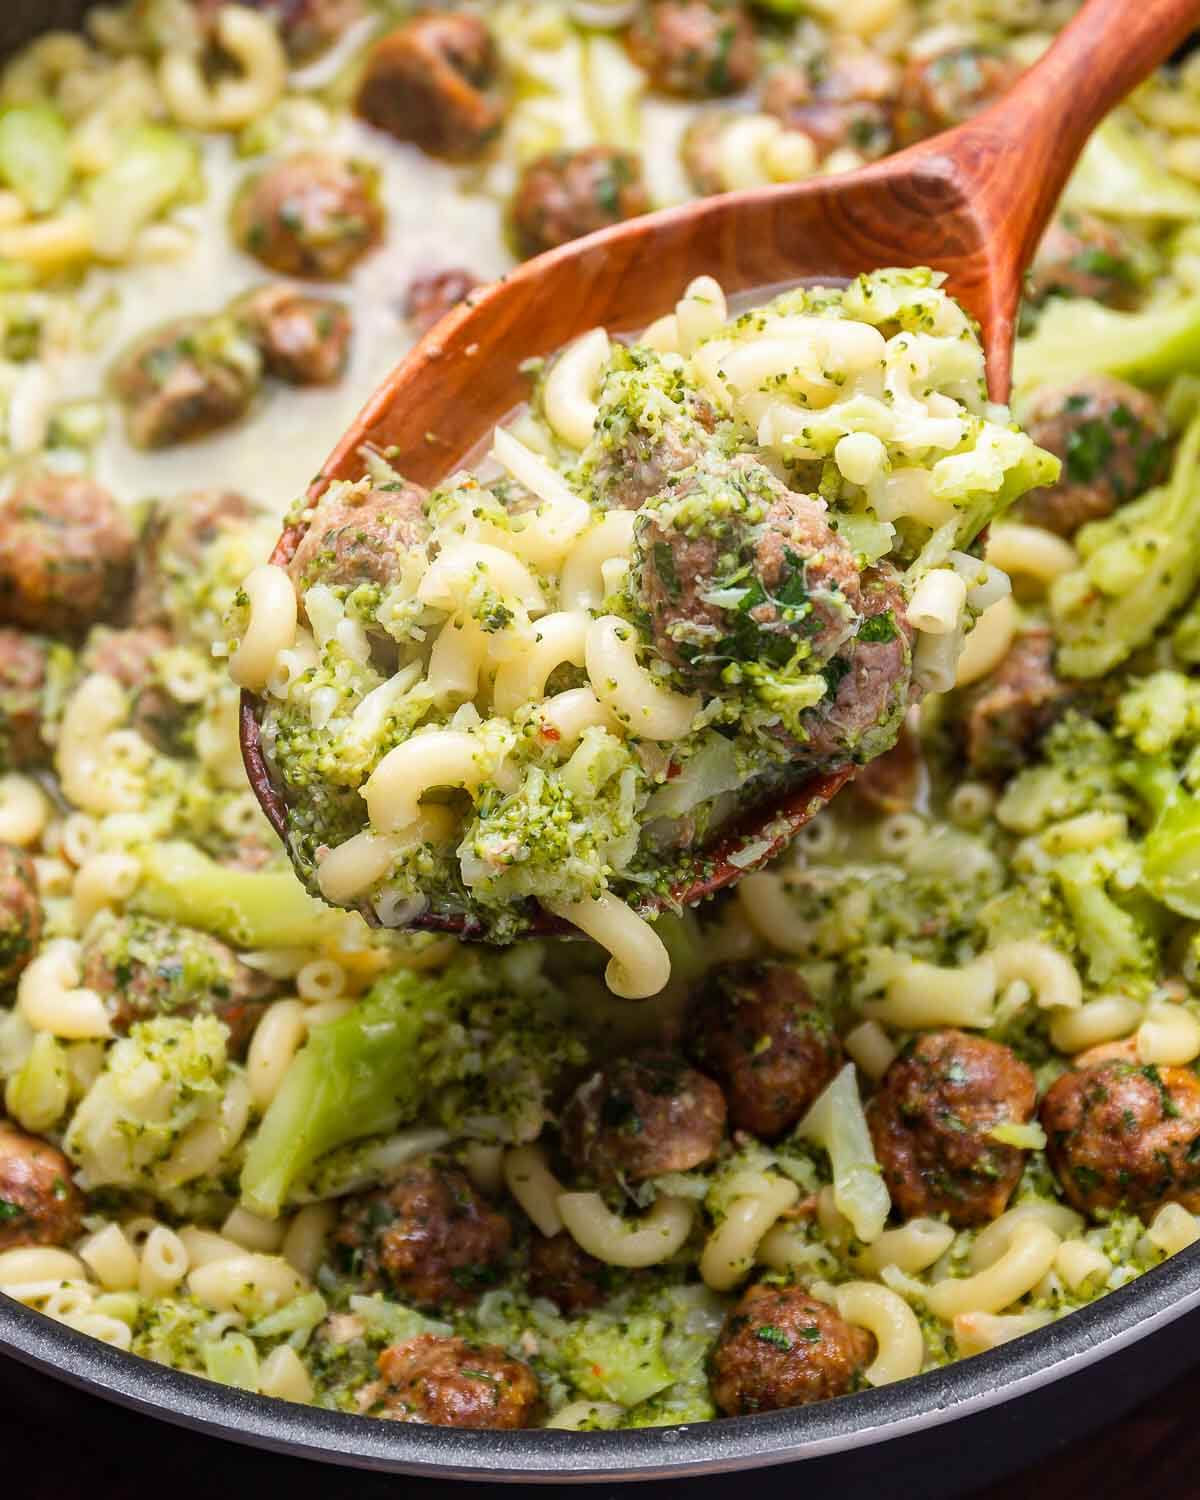 Large wooden spoon holding macaroni with broccoli and meatballs.